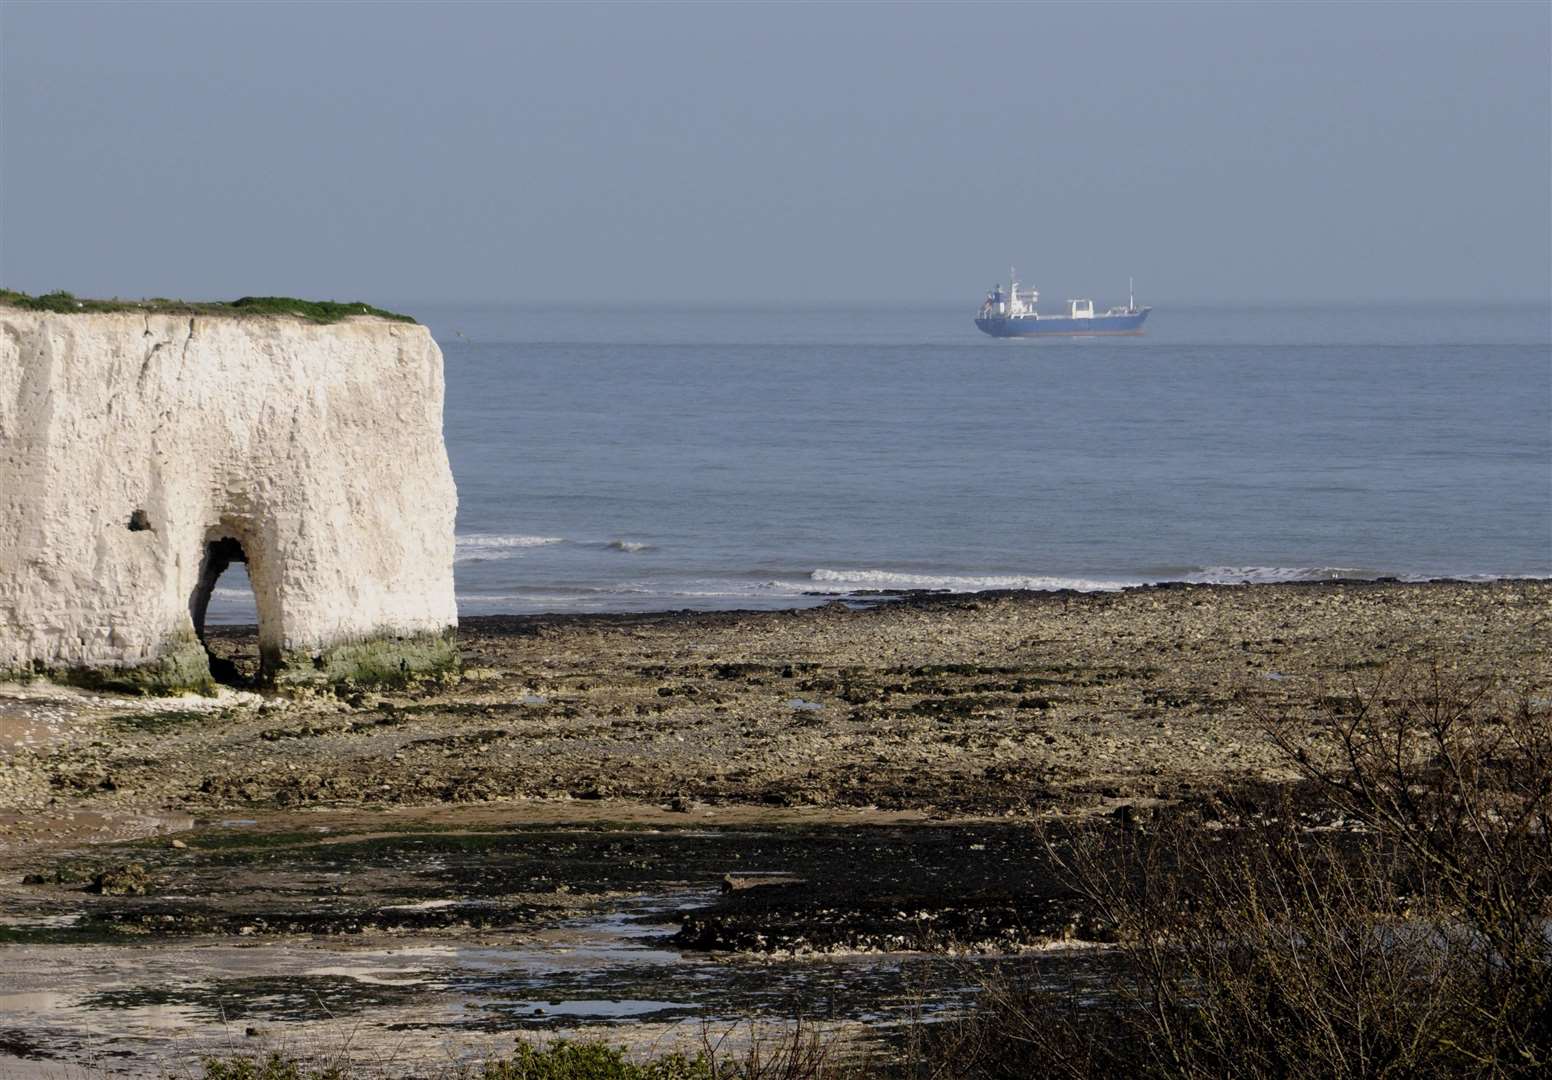 Kingsgate Bay is a picturesque spot along the route